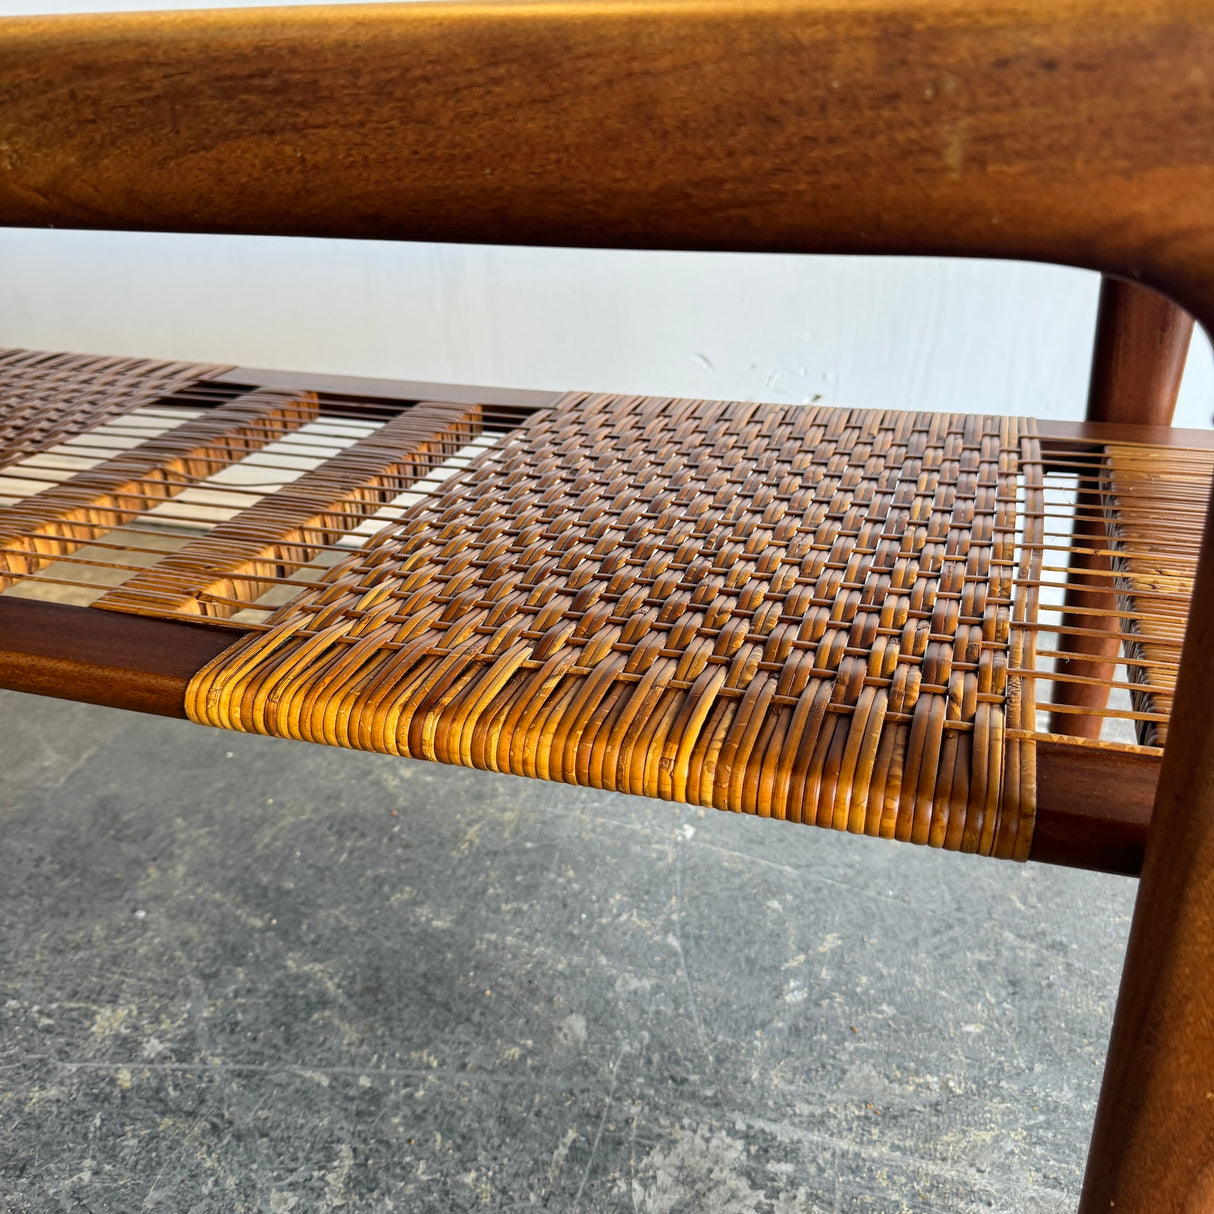 Danish Modern Teak coffee table with Braided caning